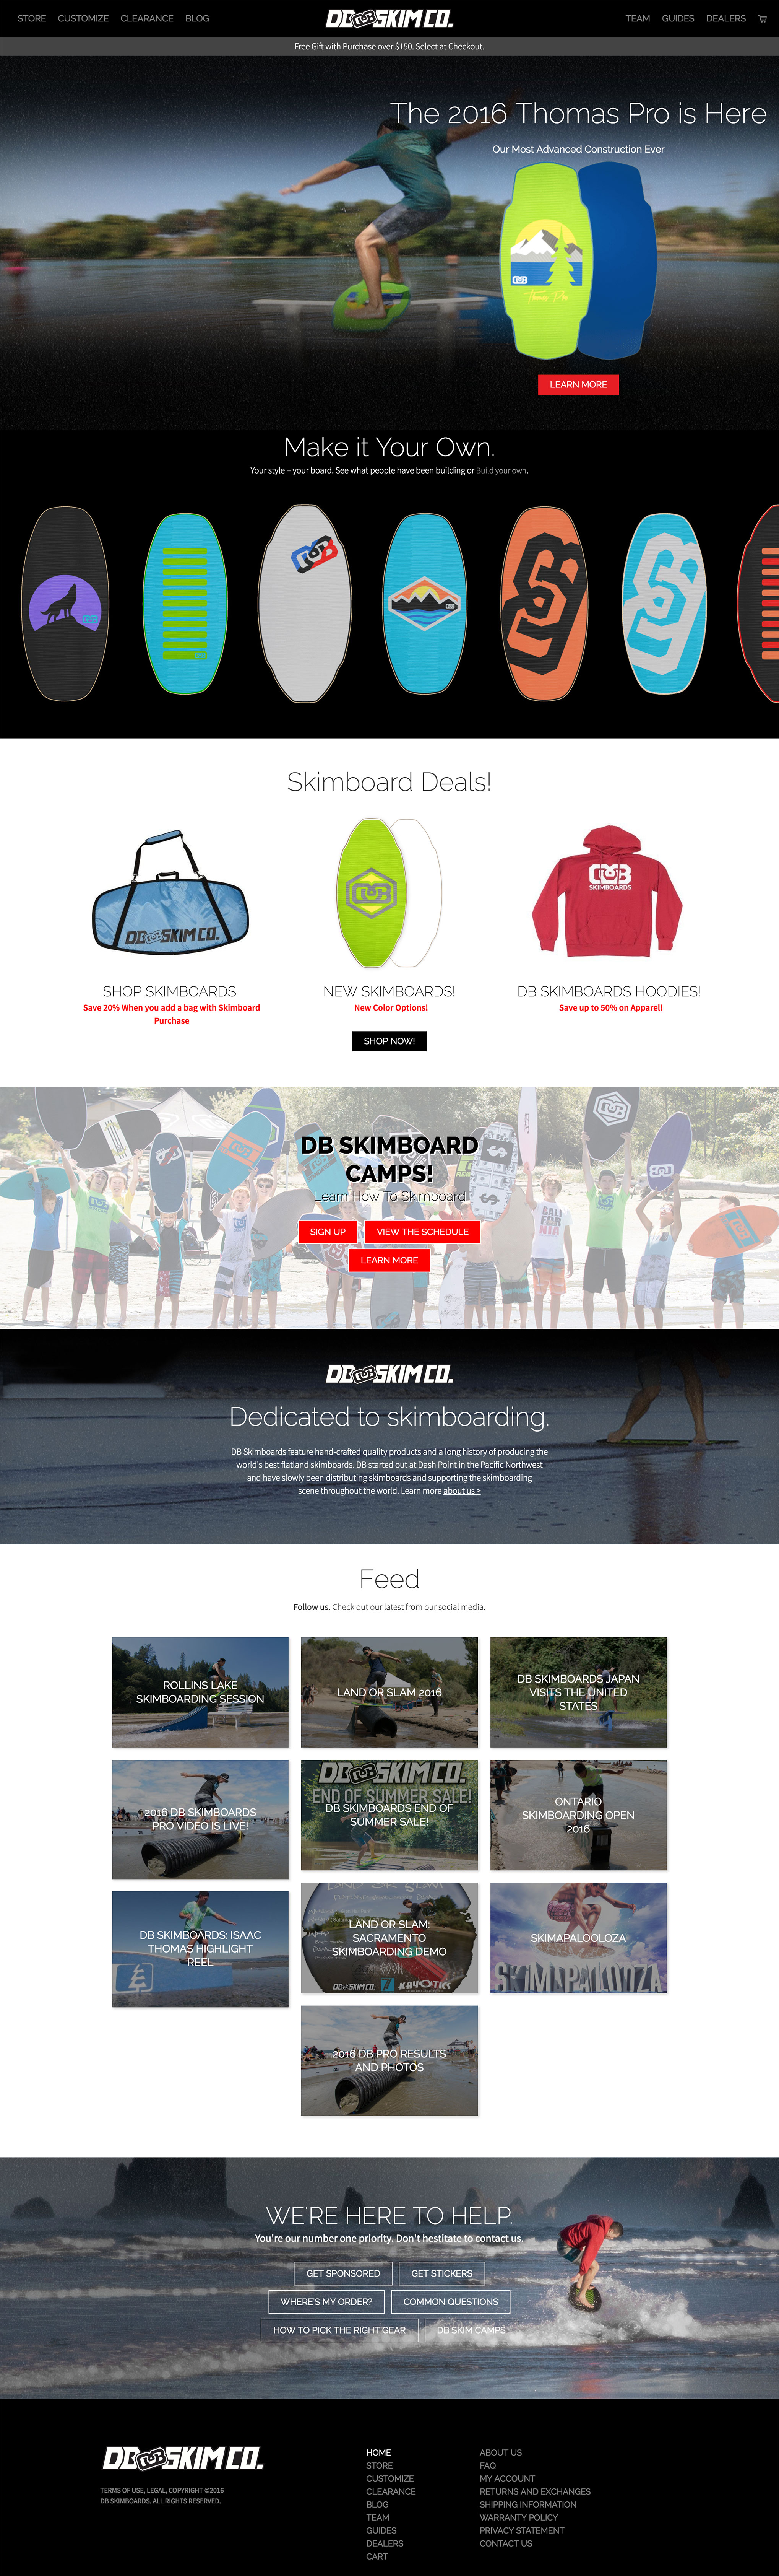 dbskimboards-home-page